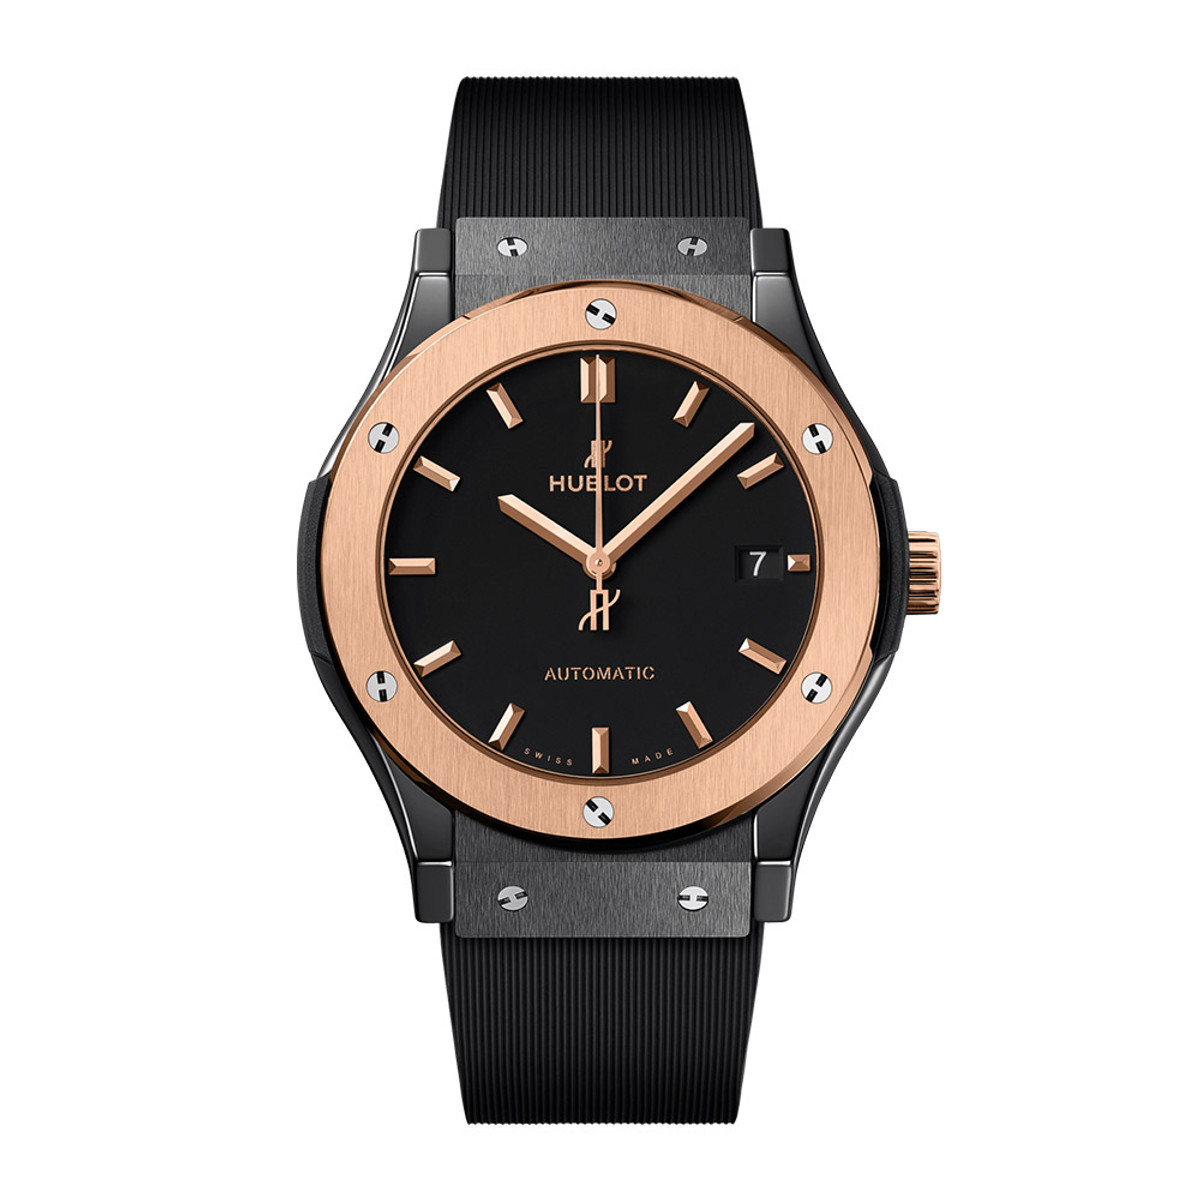 Hublot Classic Fusion Ceramic King Gold 45mm 511.CO.1181.RX-54181 Product Image